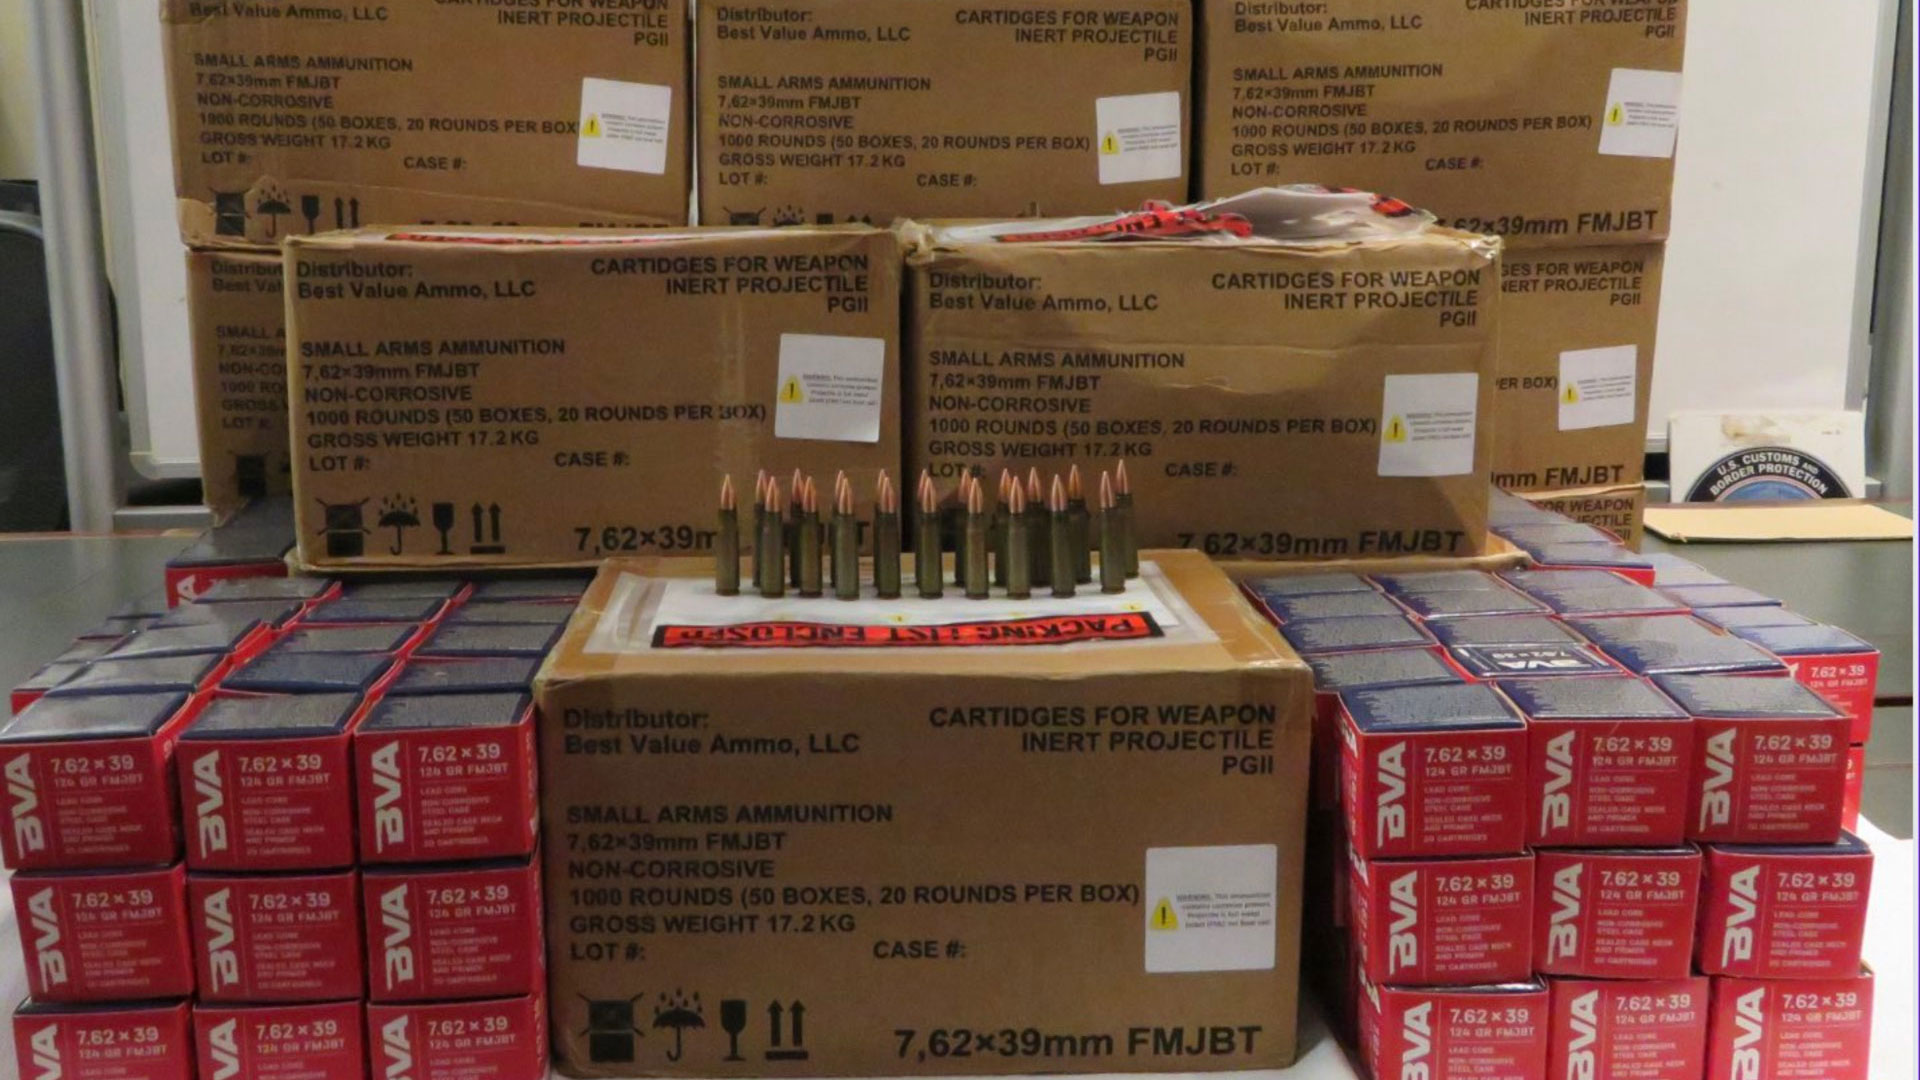 Border officials seized 19,000 rounds of AK-47 assault rifle ammunition hidden in a van on April 20 headed south at a Nogales port of entry. The ammo was most likely headed to a transnational criminal organization in Mexico, according to a tweet from Port Director Michael Humphries.